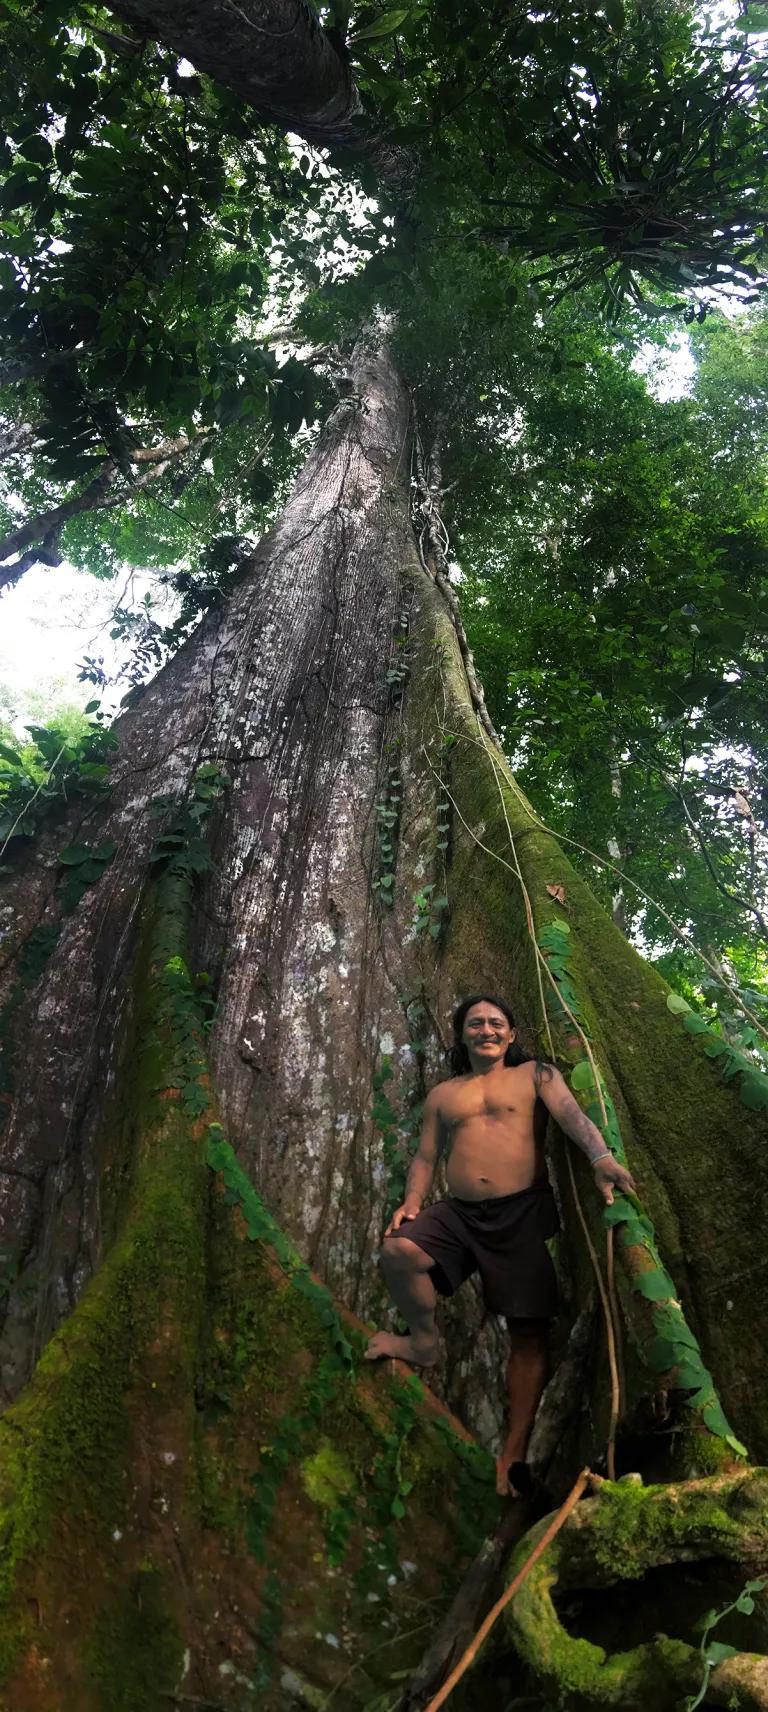 A man stands at the base of a tall tree trunk